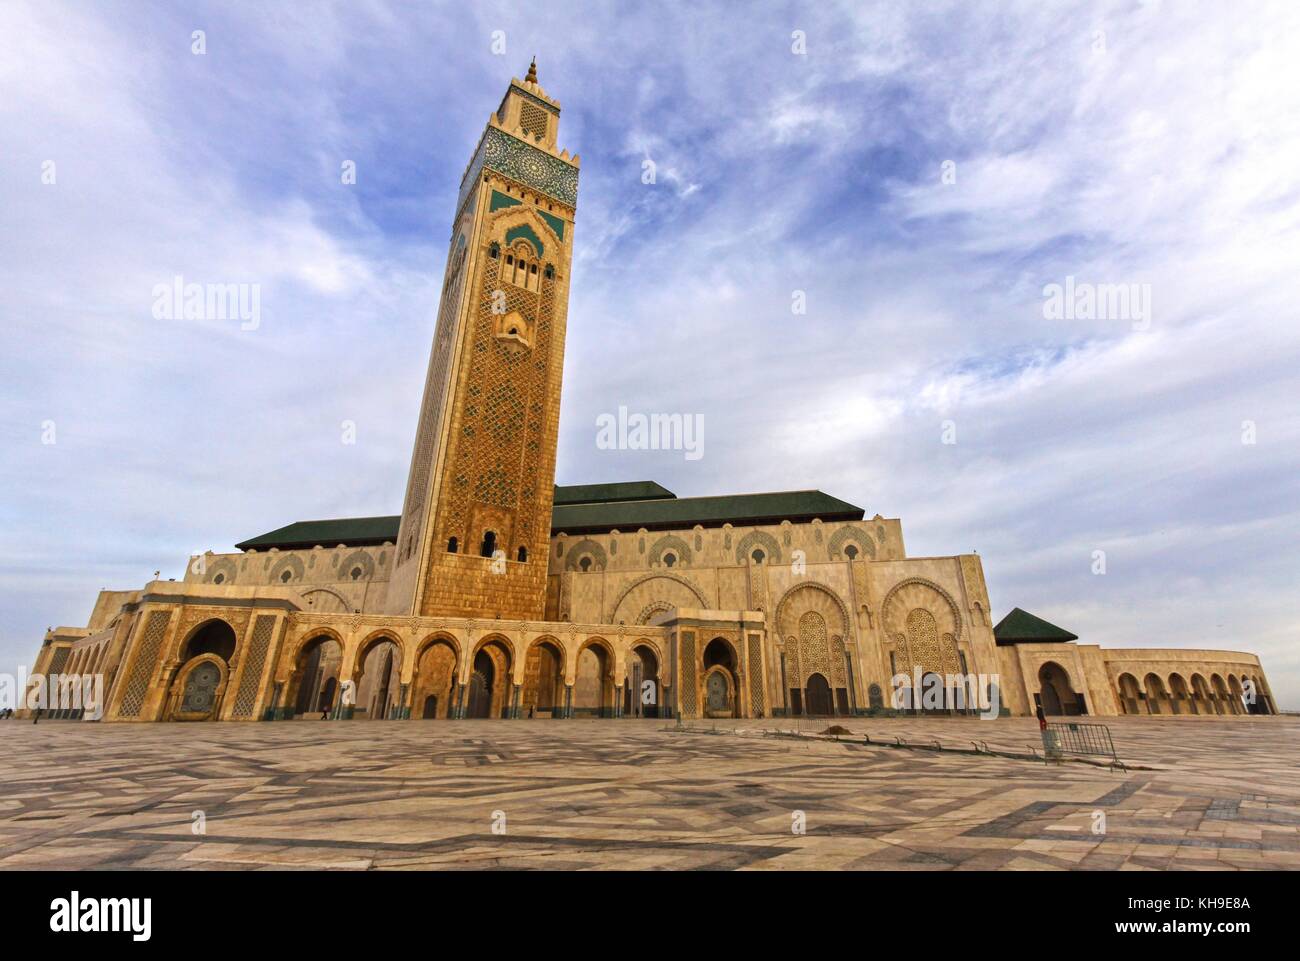 The Courtyard of Hassan 2 Mosque in Casablanca, the largest in Morocco.  Its Minaret is the world Tallest at 210 meters. Stock Photo